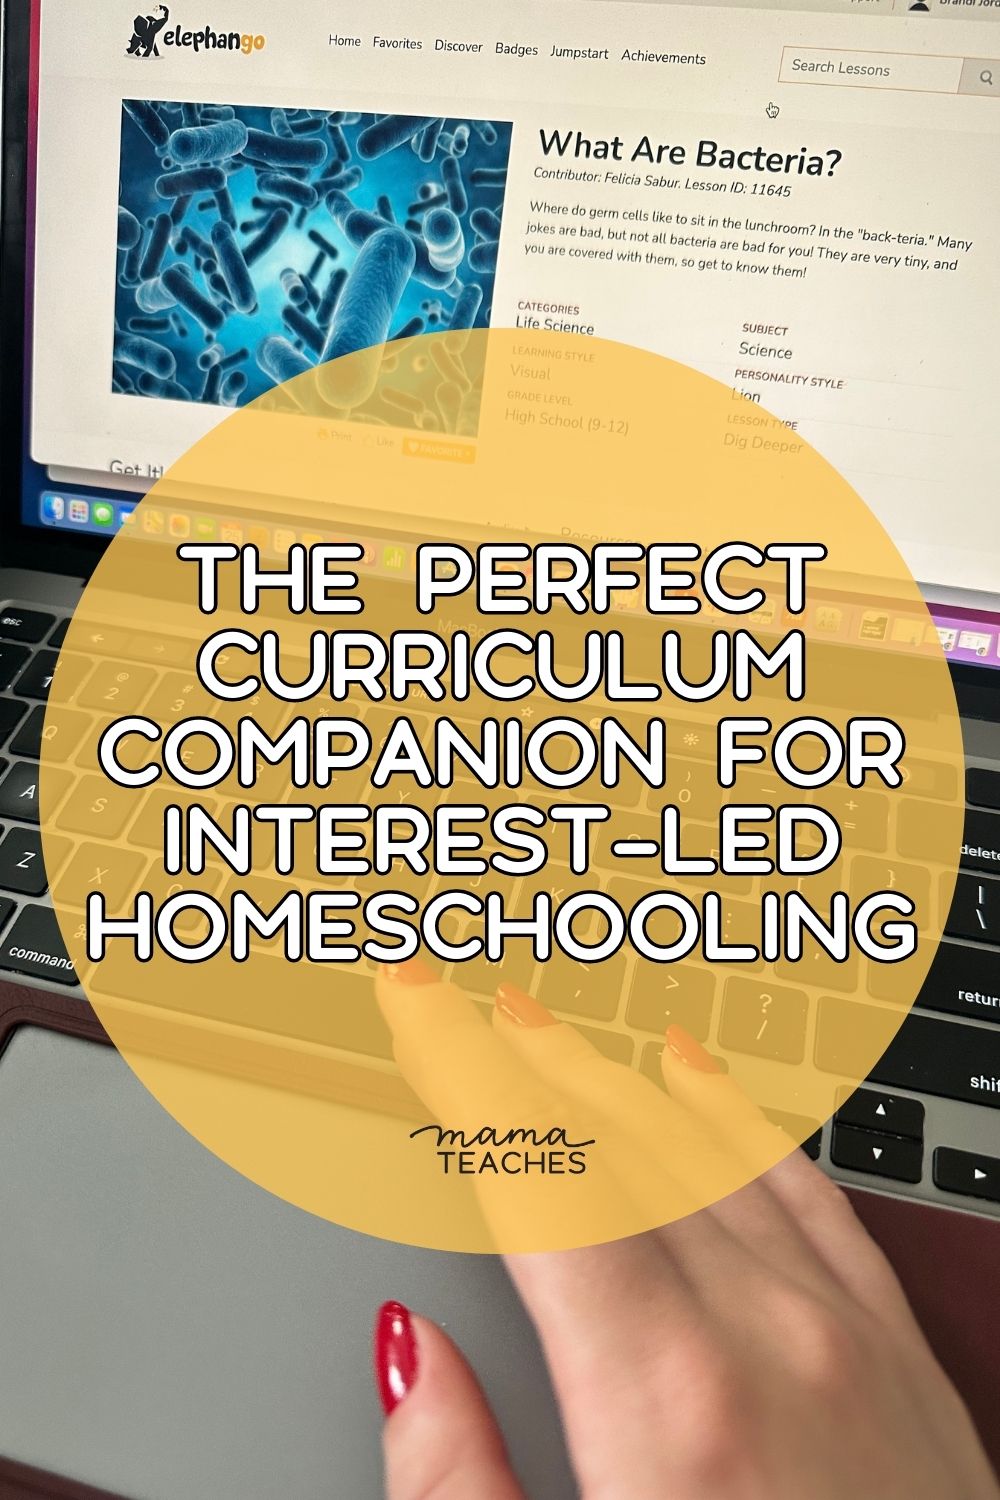 The Perfect Curriculum Companion for Interest-led Homeschooling